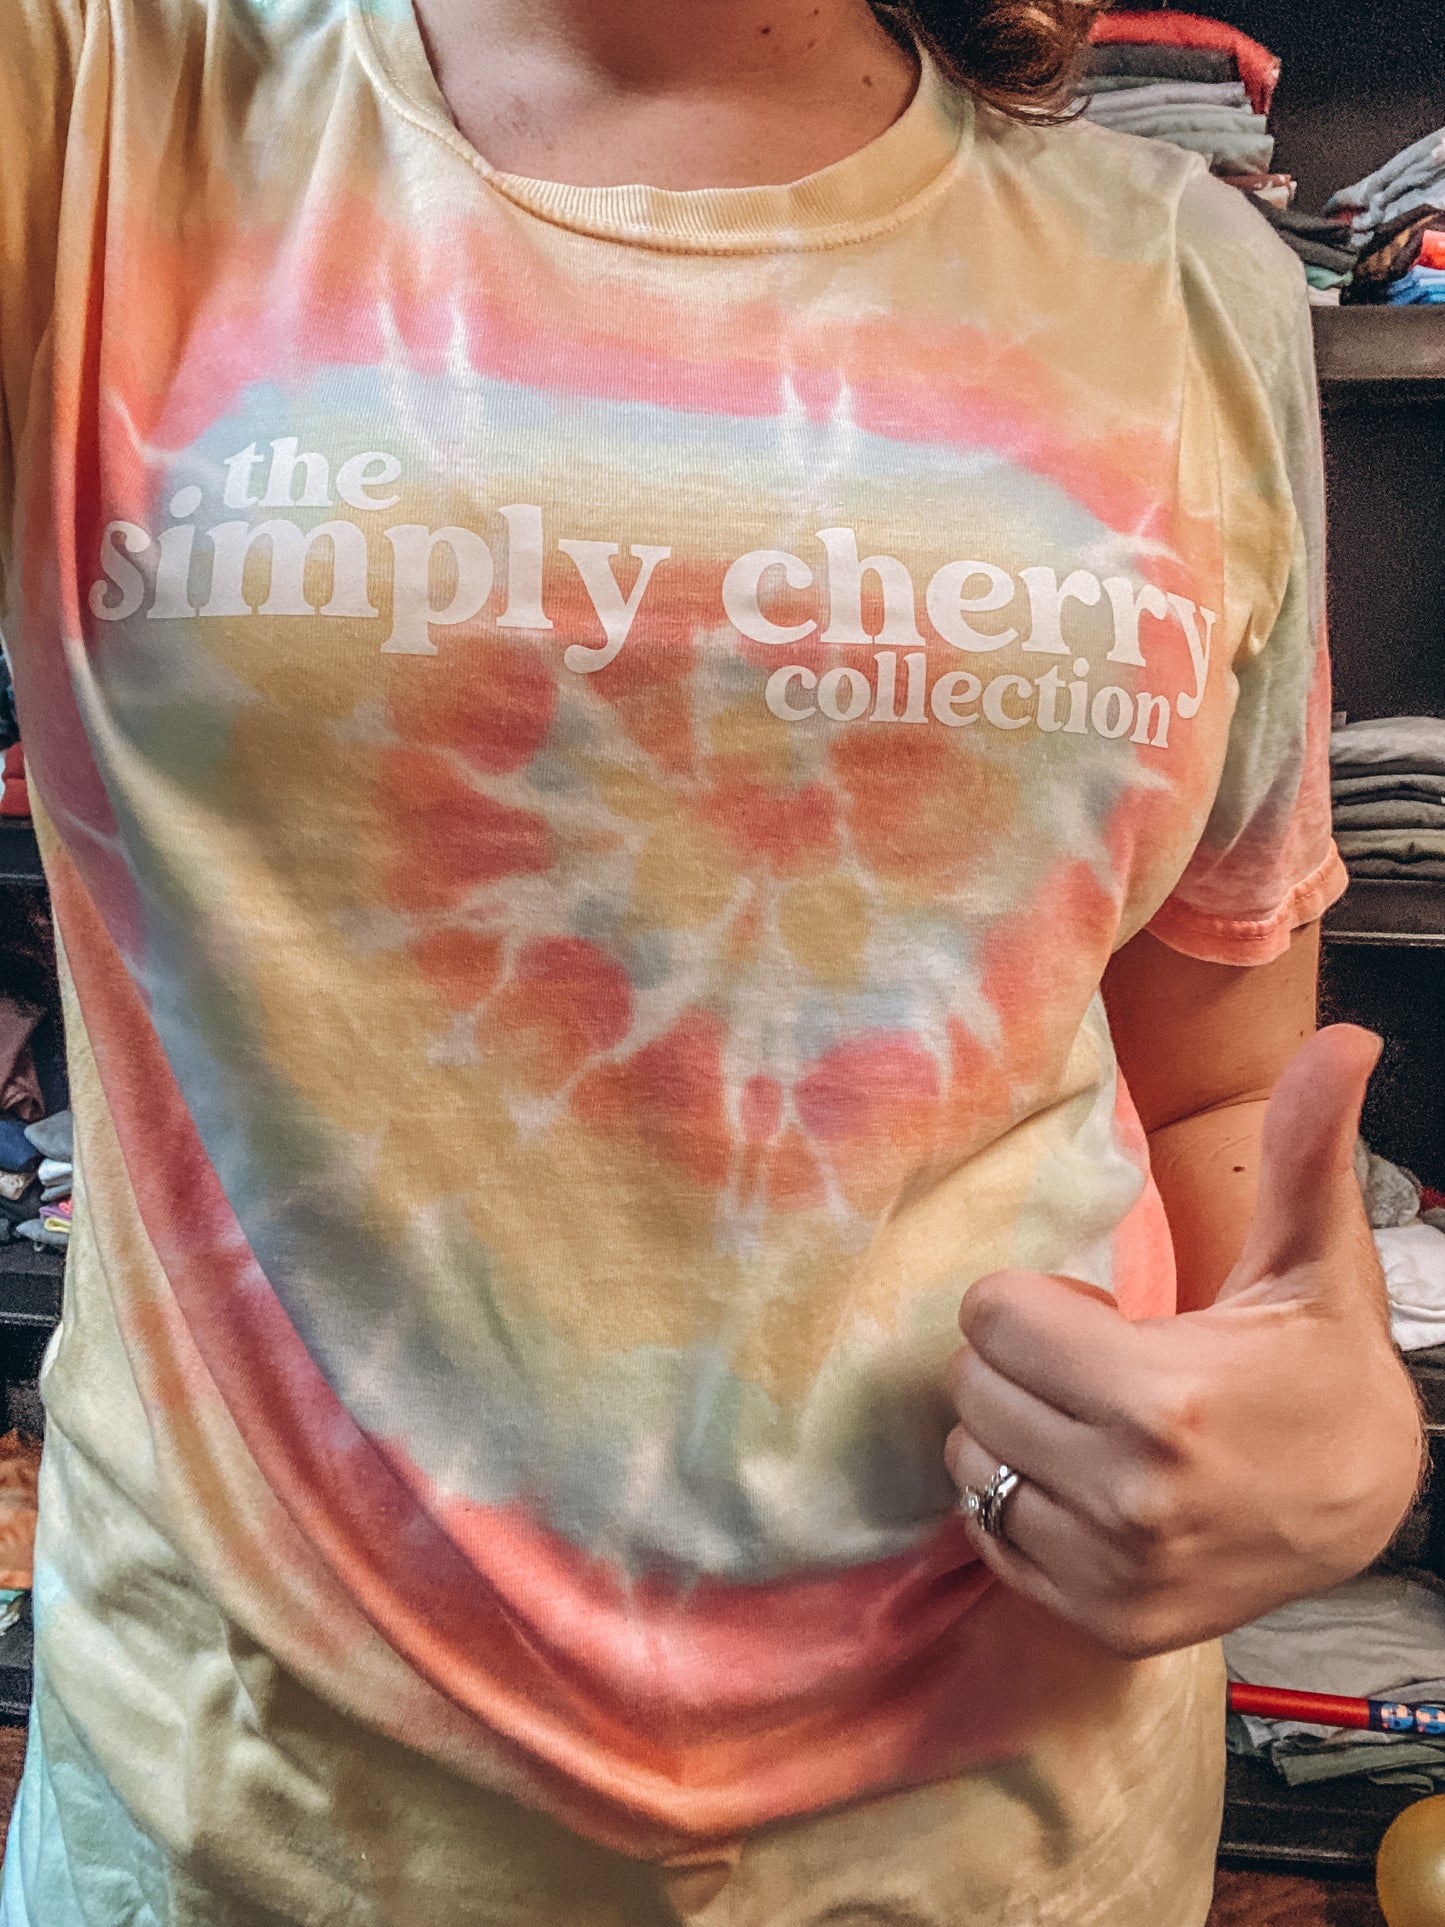 The Simply Cherry Collection